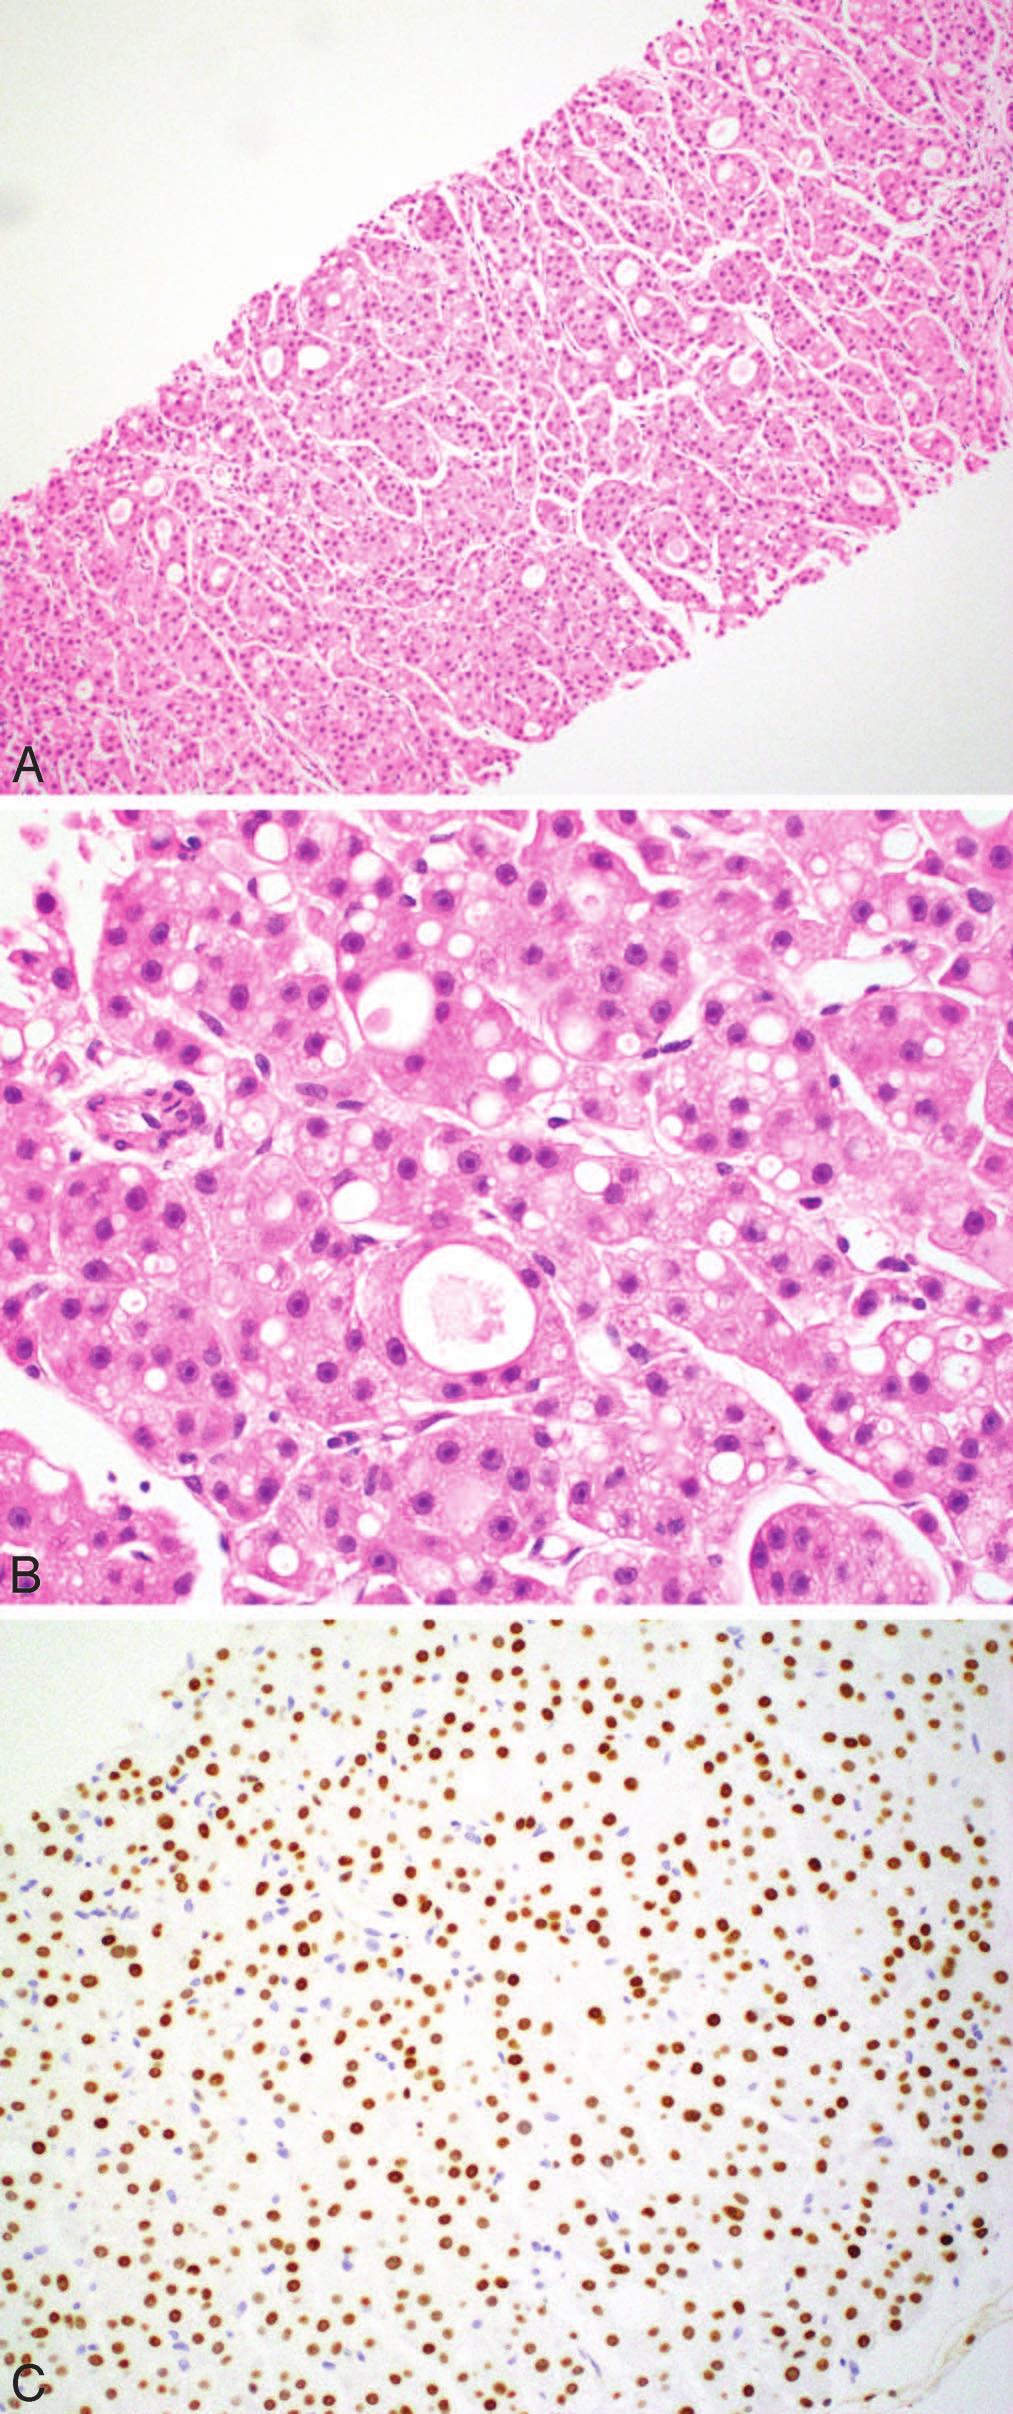 Hep Par 1 (38%). 159 A high proportion of hepatoid carcinomas are also positive for pancytokeratin AE1/AE3 (92%) and GPC3 (100%). Canalicular pcea and CD10 stains are seen in two-thirds of cases.